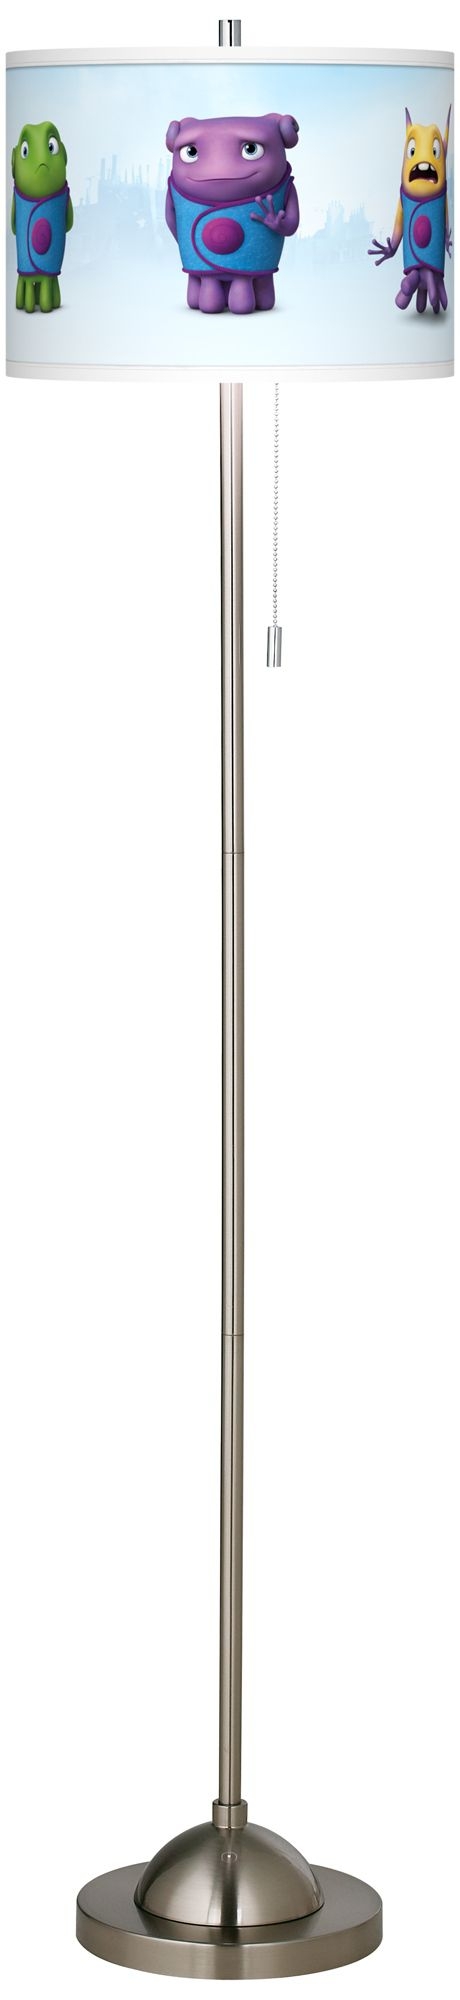 Officially Licensed Floor Lamp